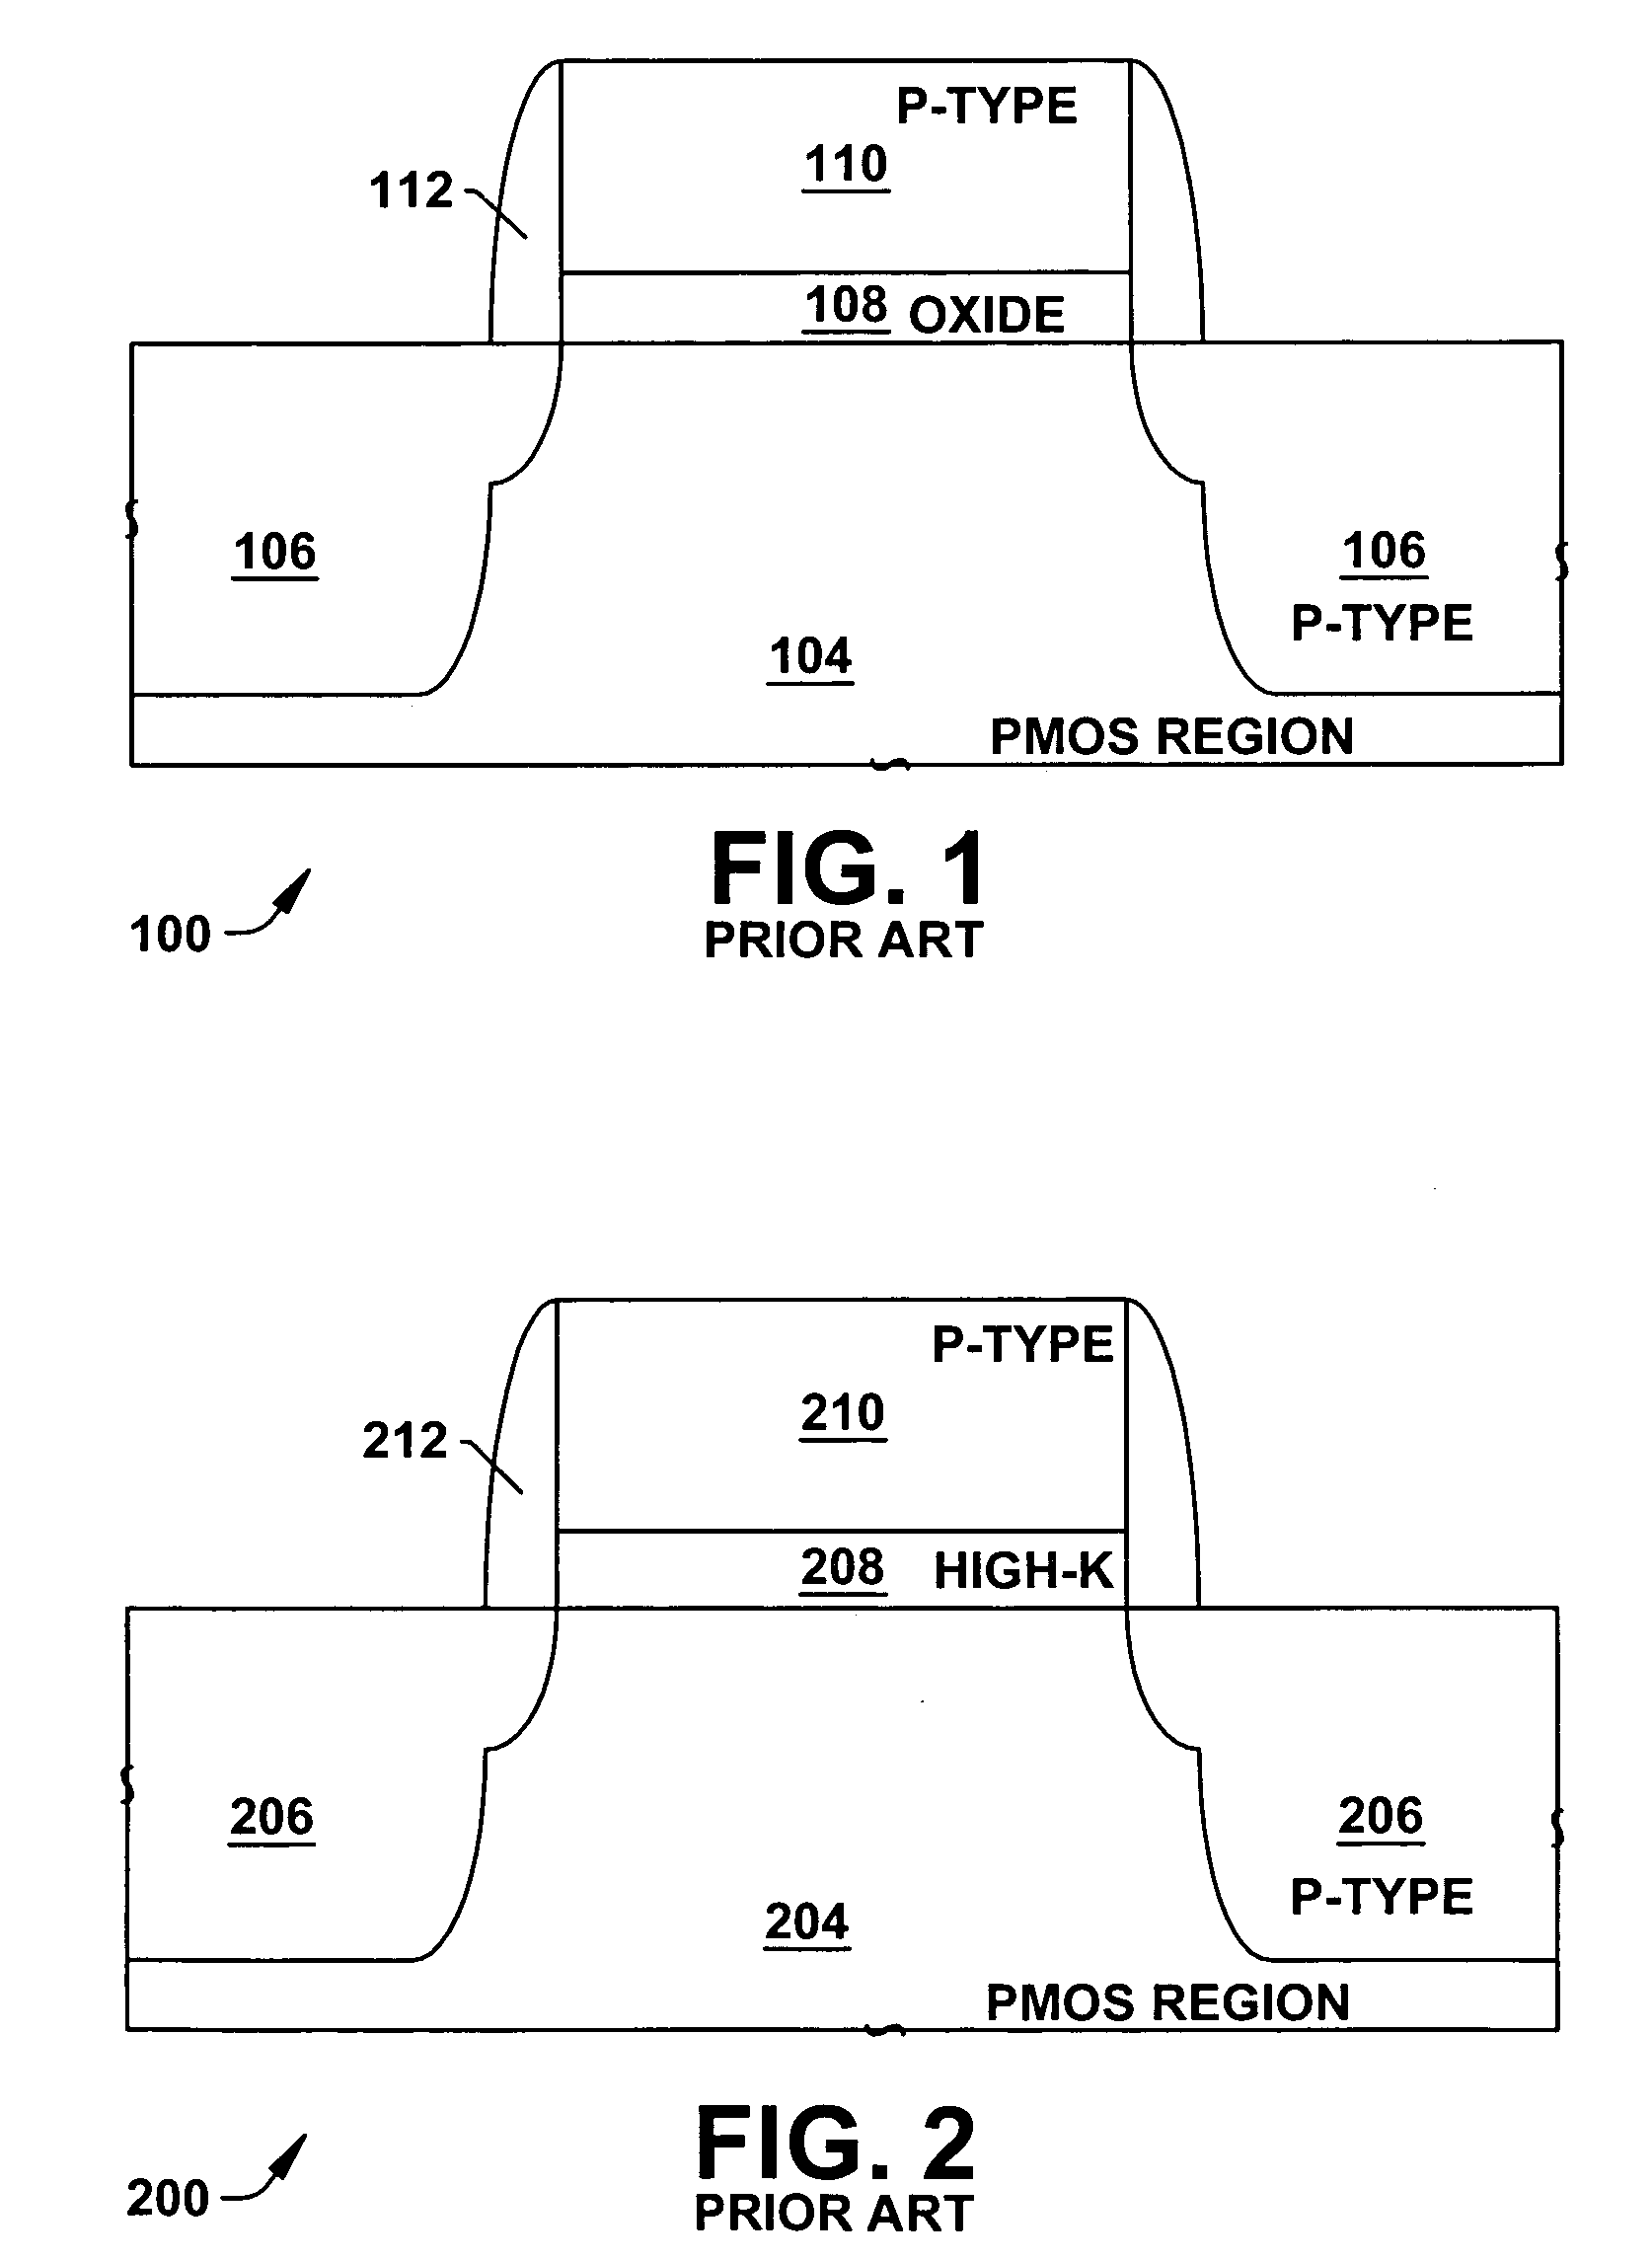 Semiconductor CMOS devices and methods with NMOS high-k dielectric formed prior to core PMOS dielectric formation